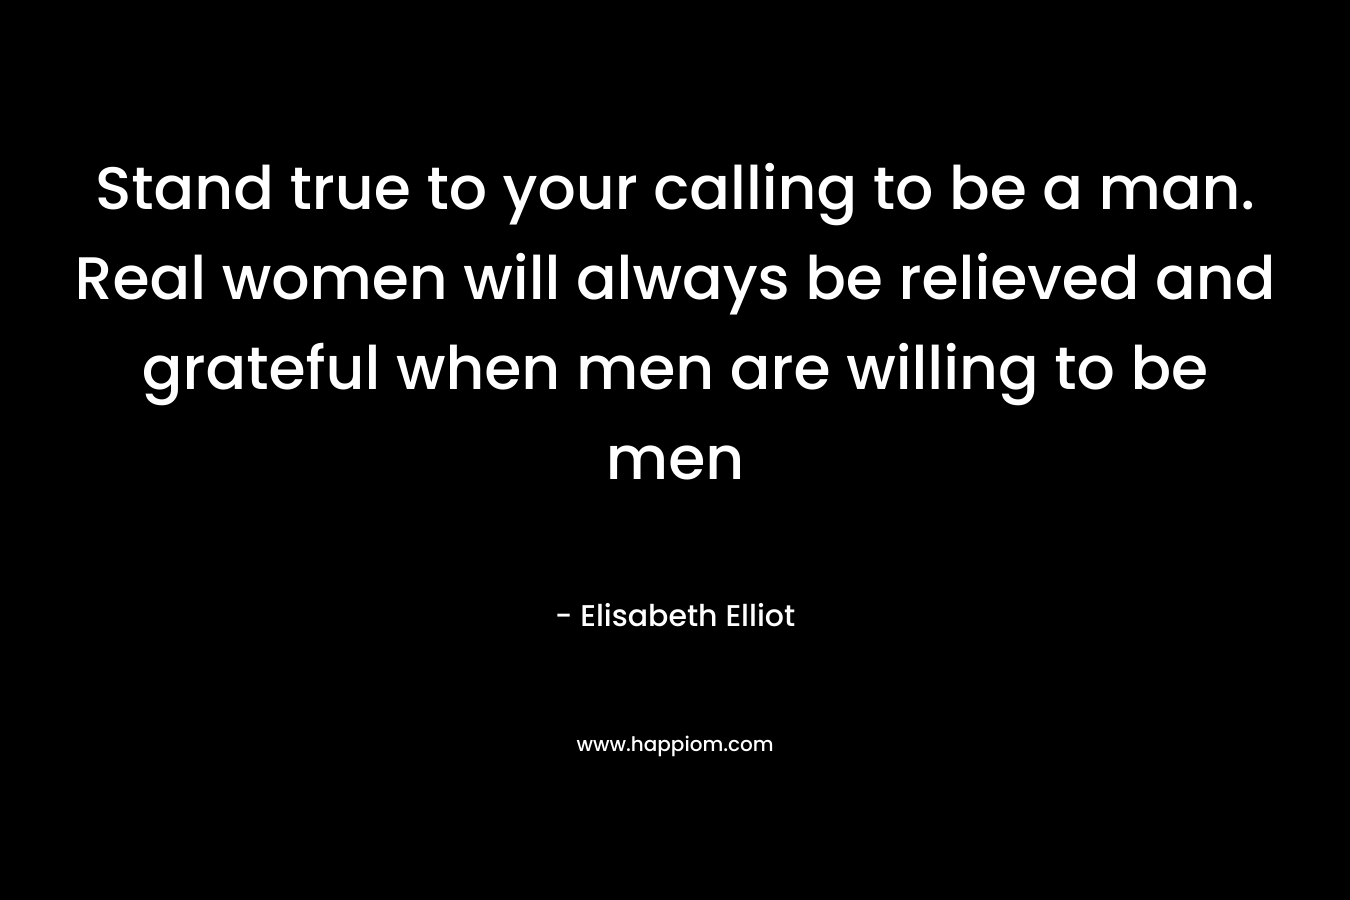 Stand true to your calling to be a man. Real women will always be relieved and grateful when men are willing to be men – Elisabeth Elliot